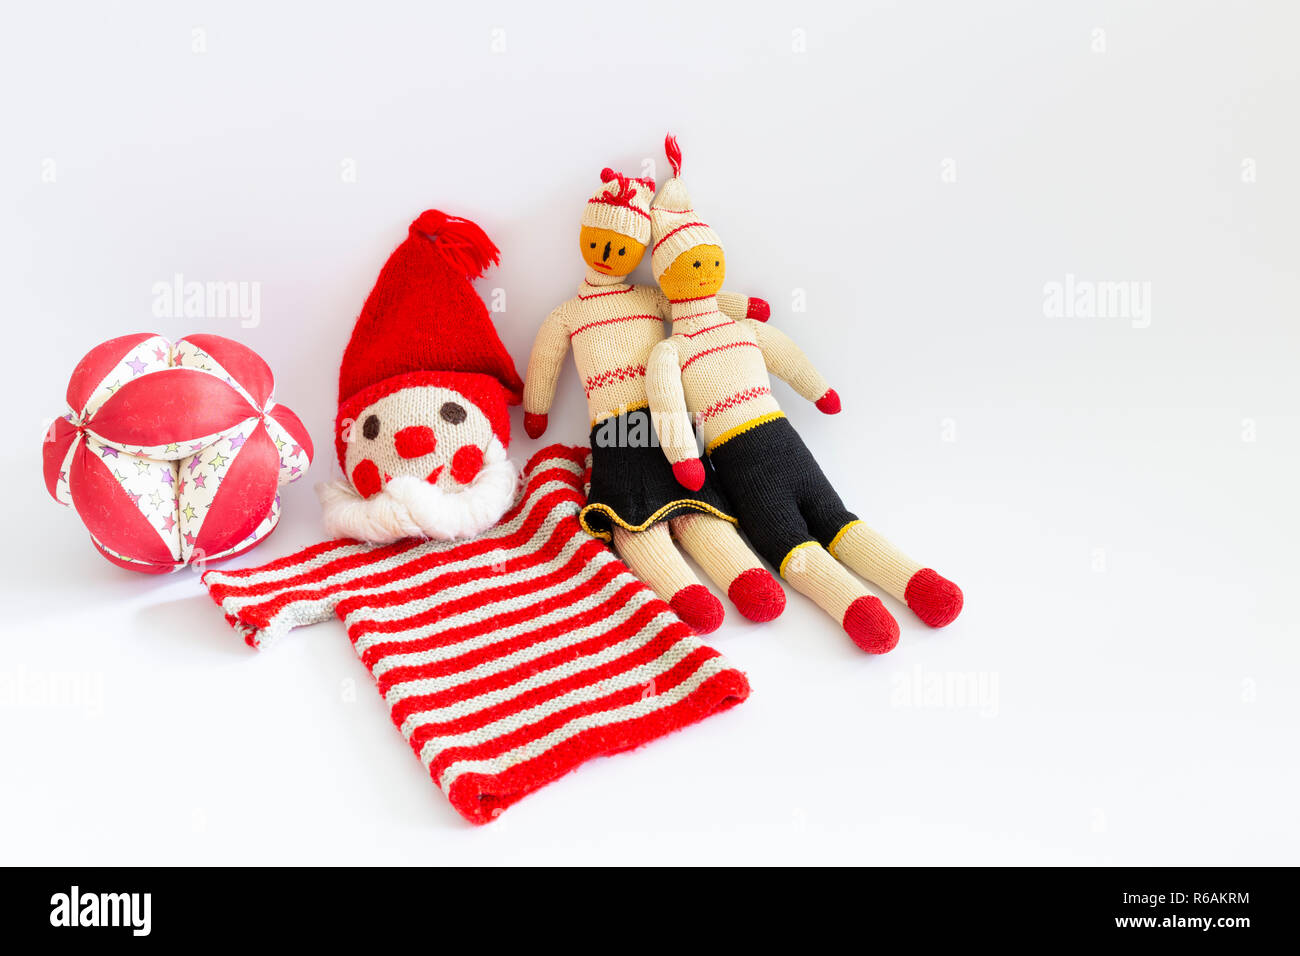 Front view of funny vintage children toys on white background. Assortment consists of a clown, a male doll, a female doll, and a ball. Stock Photo